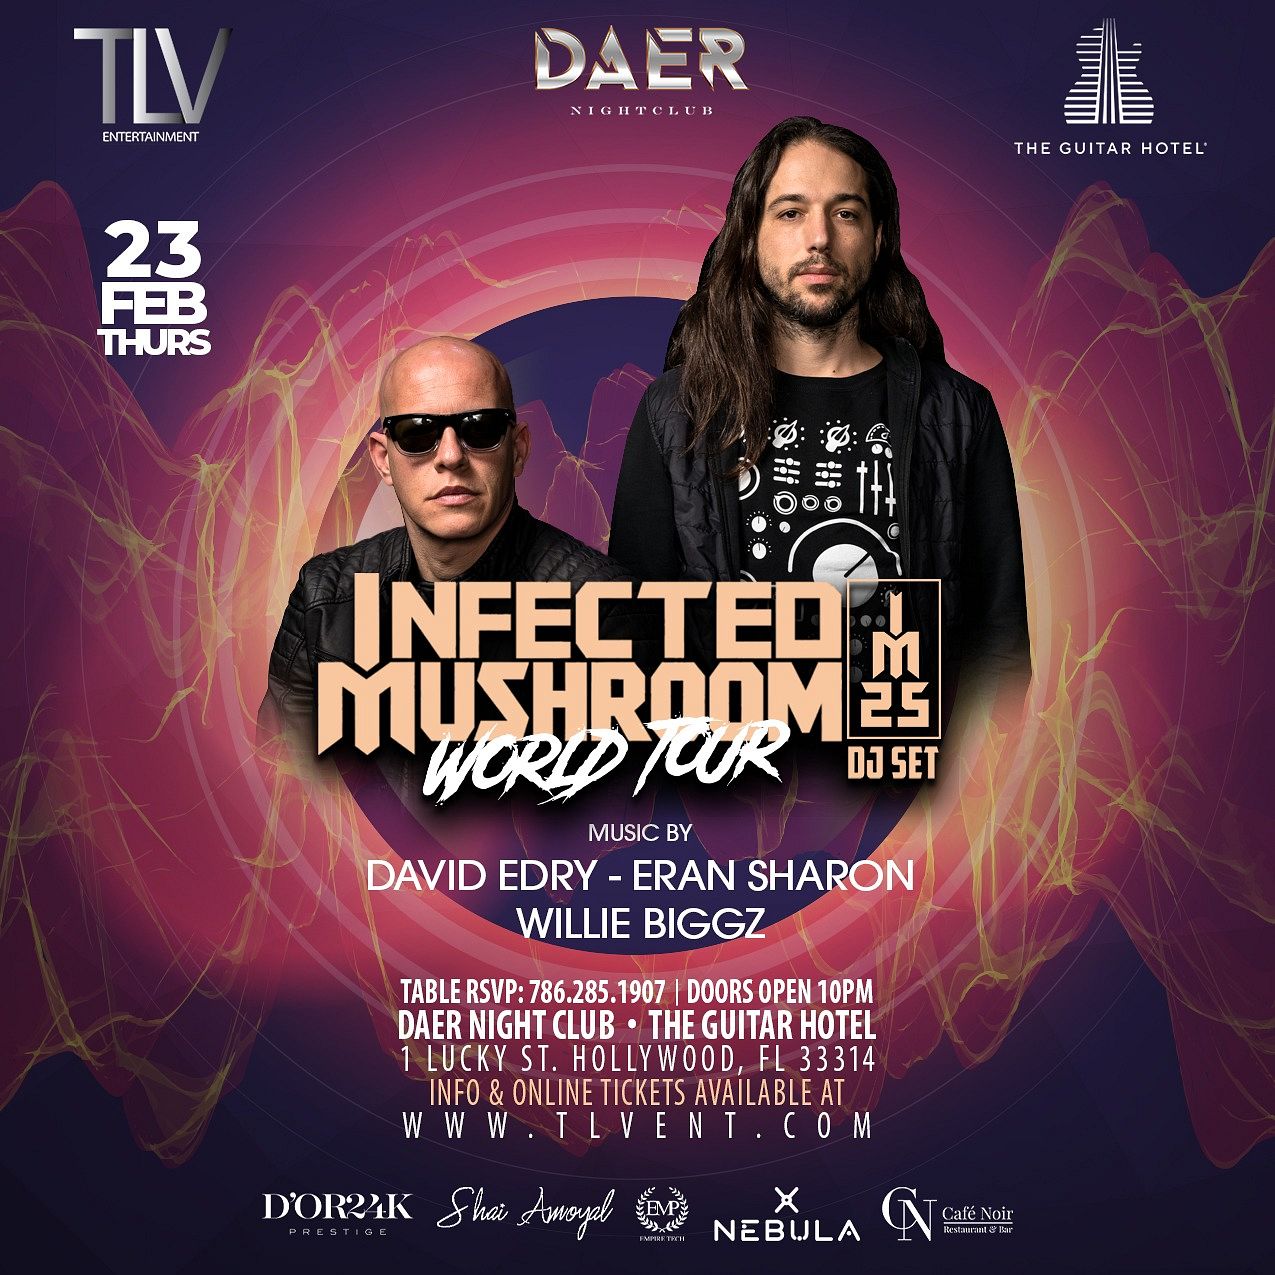 Infected Mushroom DAER Tickets at DAER South